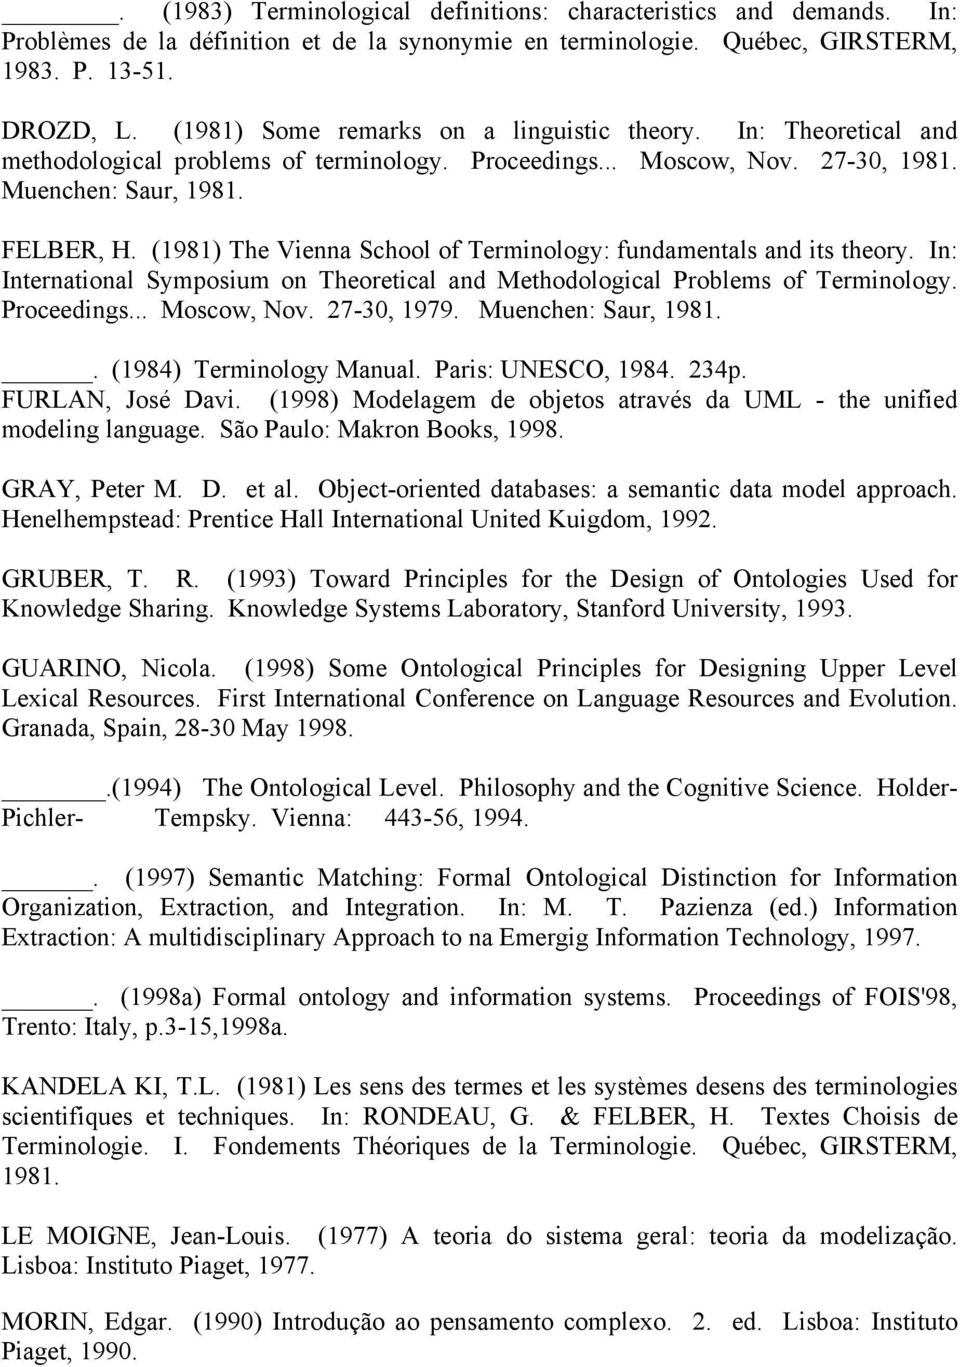 (1981) The Vienna School of Terminology: fundamentals and its theory. In: International Symposium on Theoretical and Methodological Problems of Terminology. Proceedings... Moscow, Nov. 27-30, 1979.